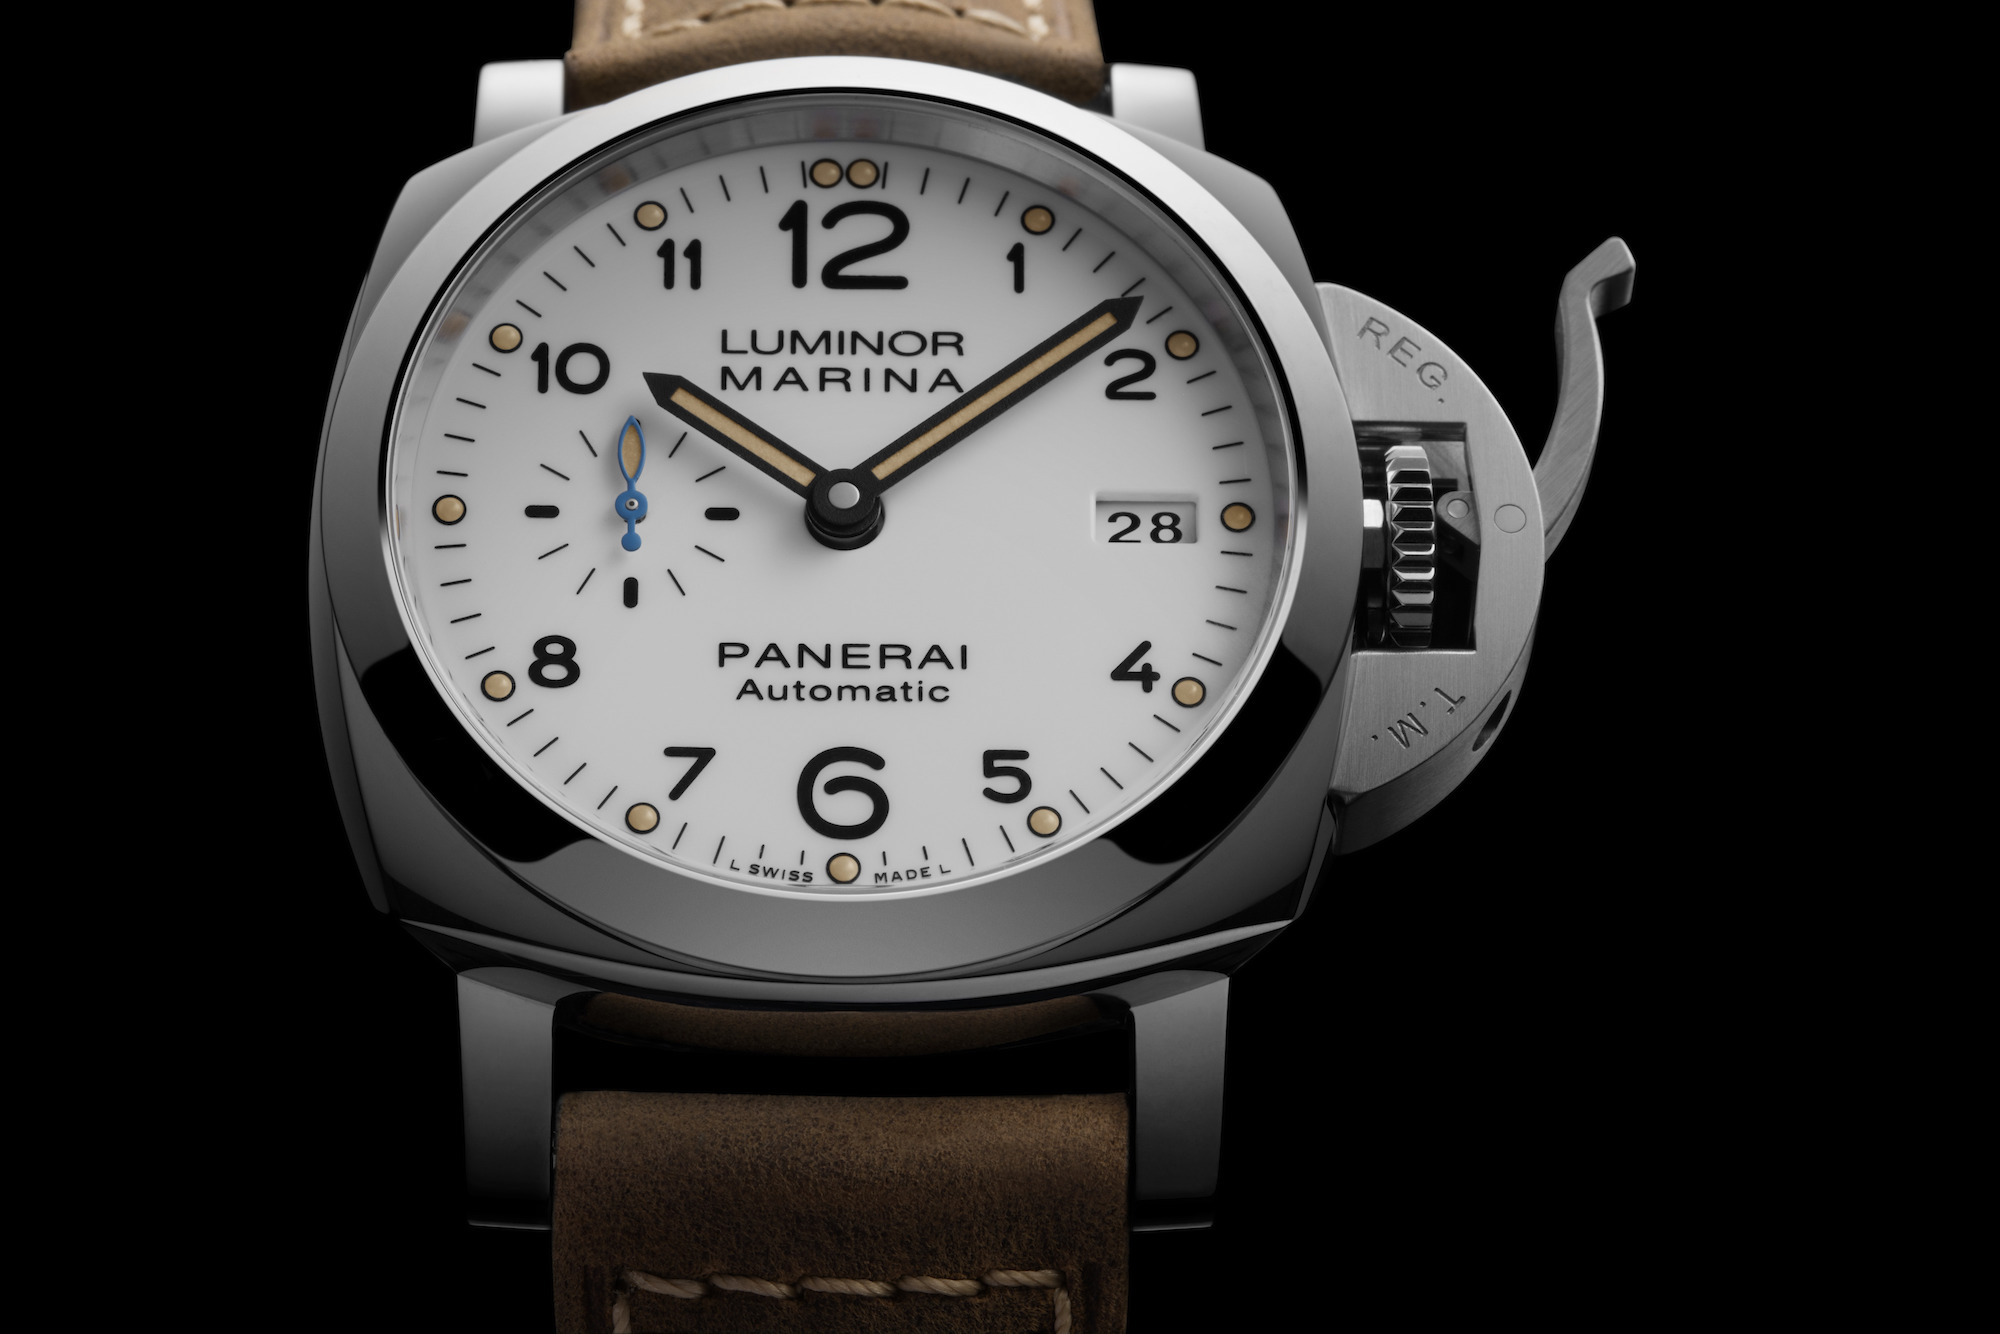 Introducing The New Luminor Marina 1950 3 Days Automatic Collection From Officine Panerai